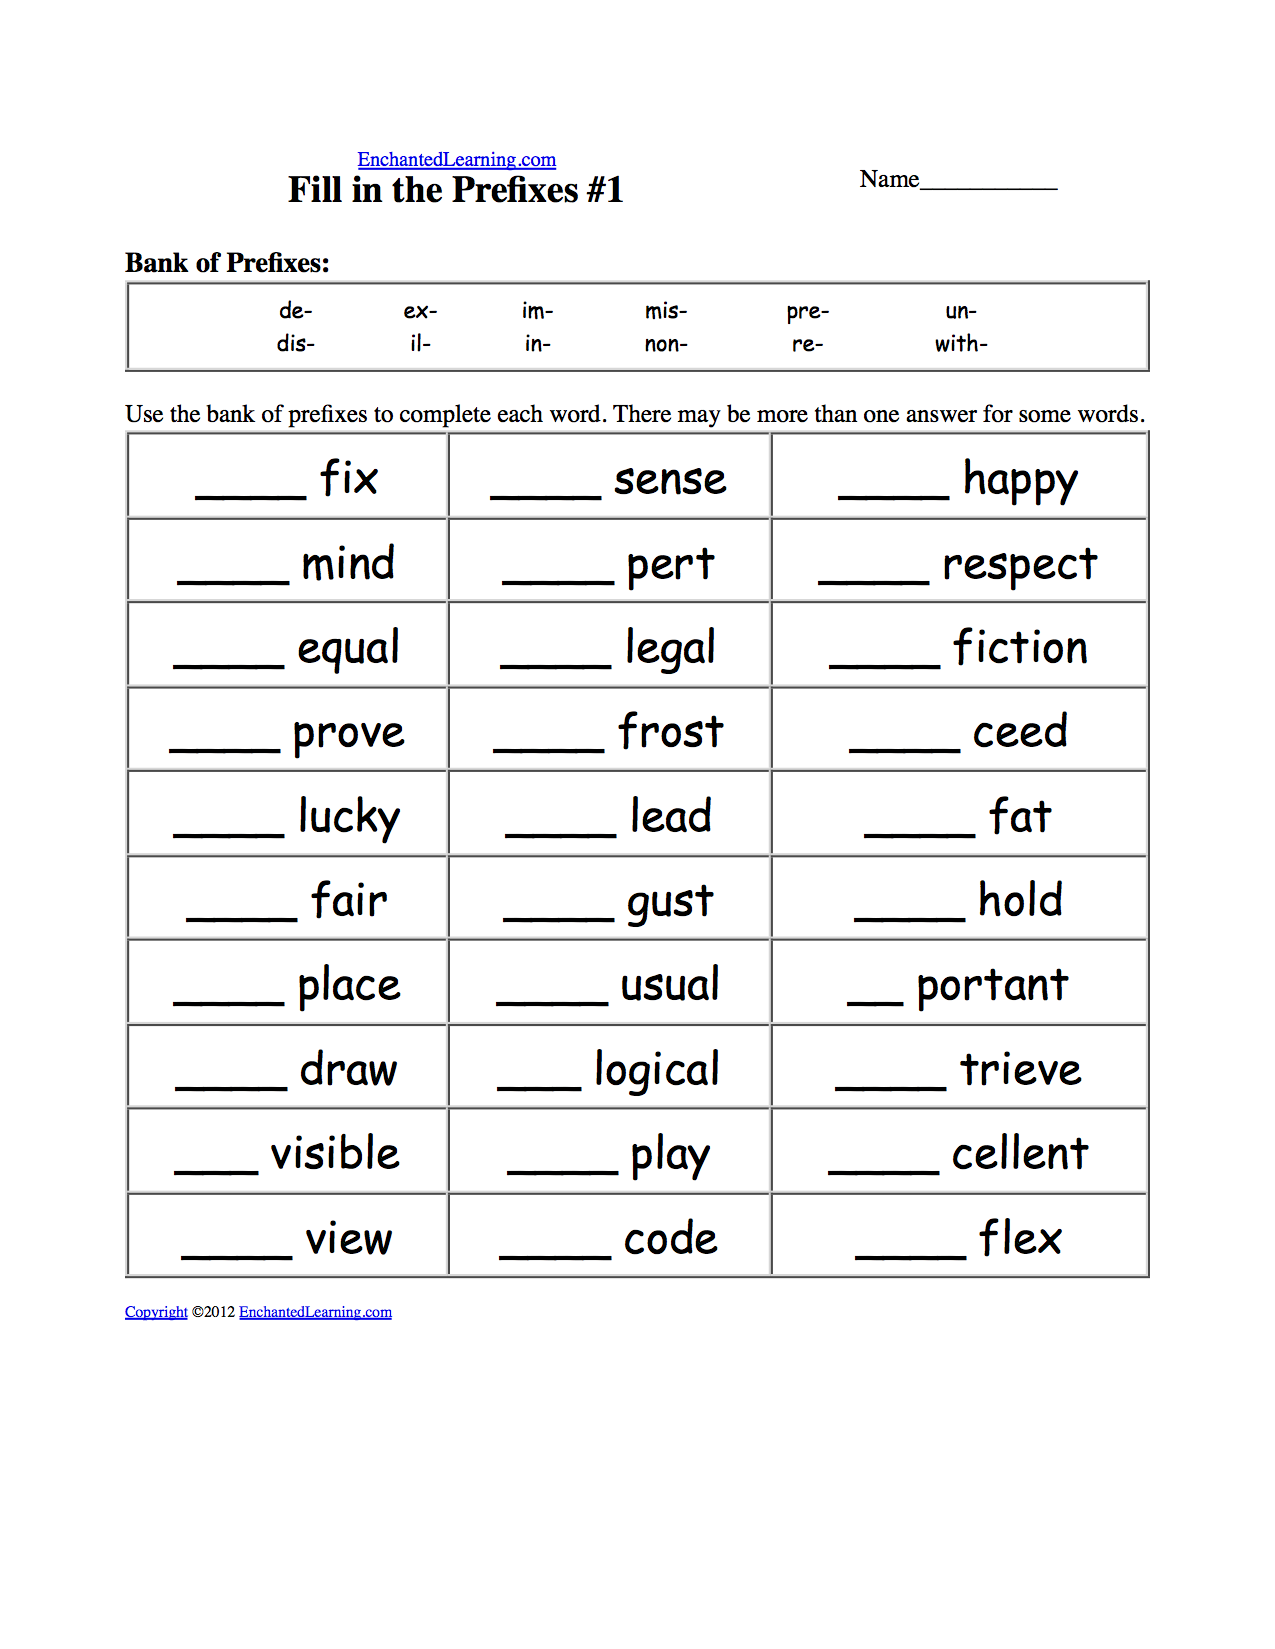 fill-in-the-prefixes-worksheets-enchantedlearning